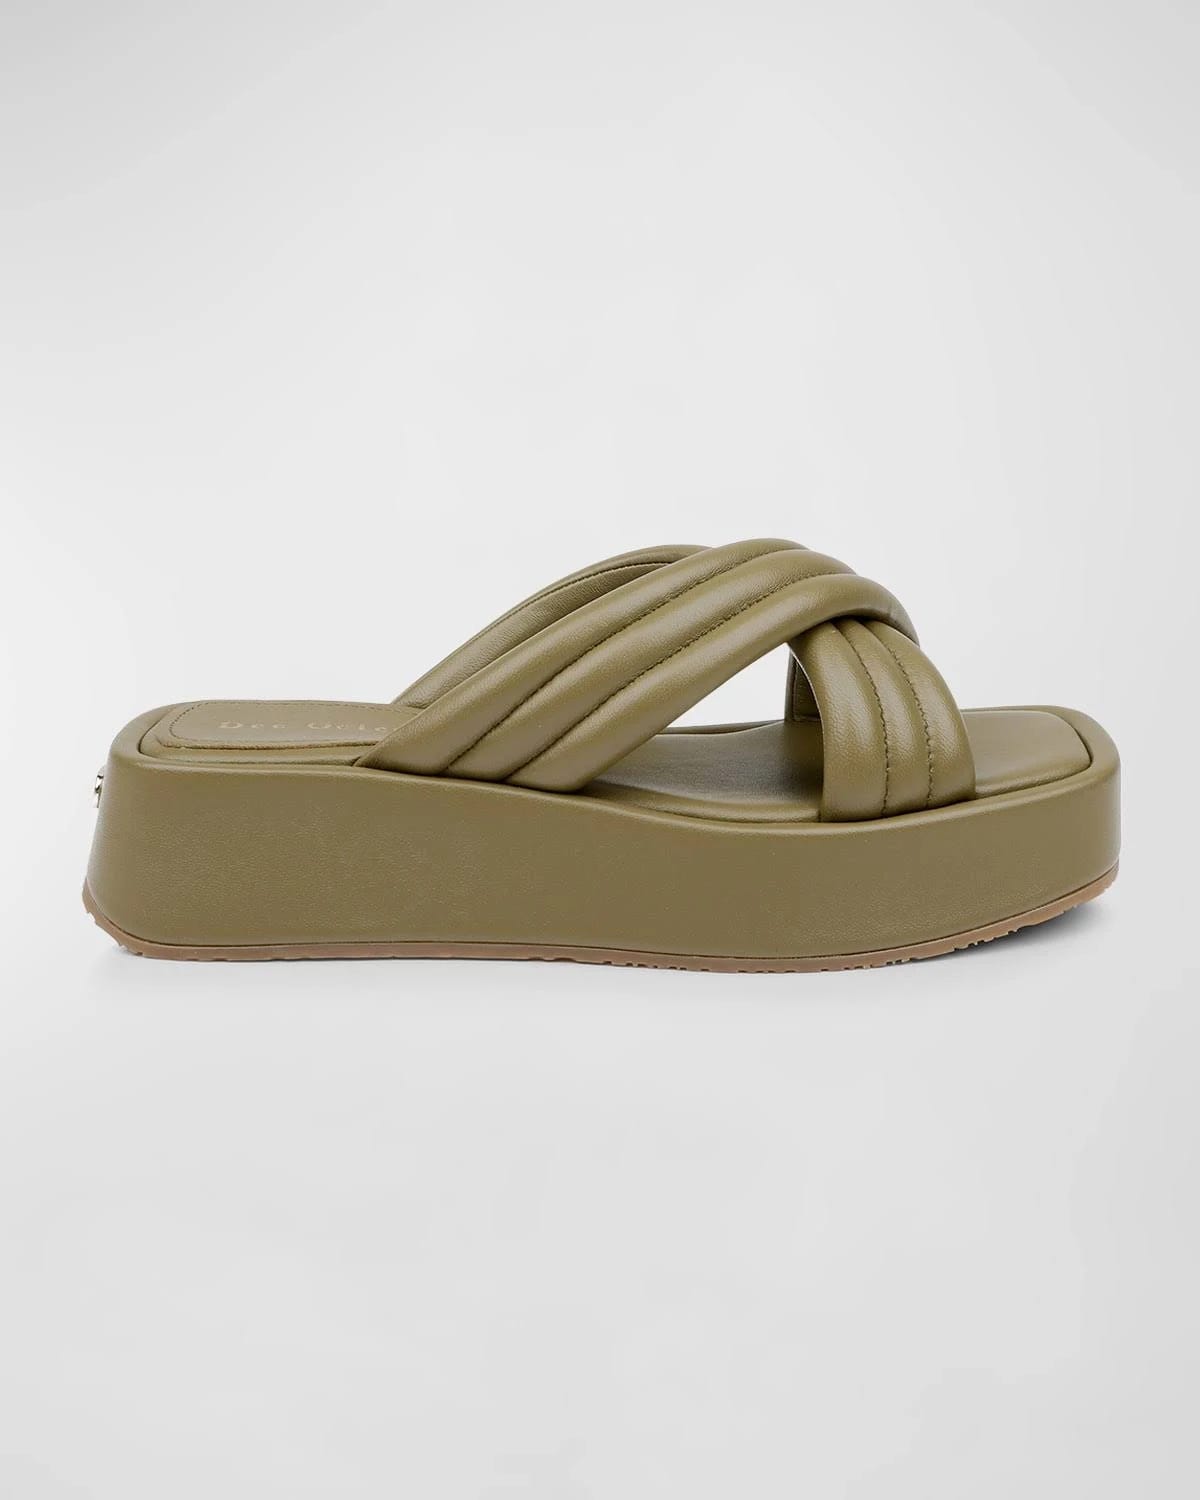 Moss Flatform Sandals with Wide Leather Cross Straps | Image